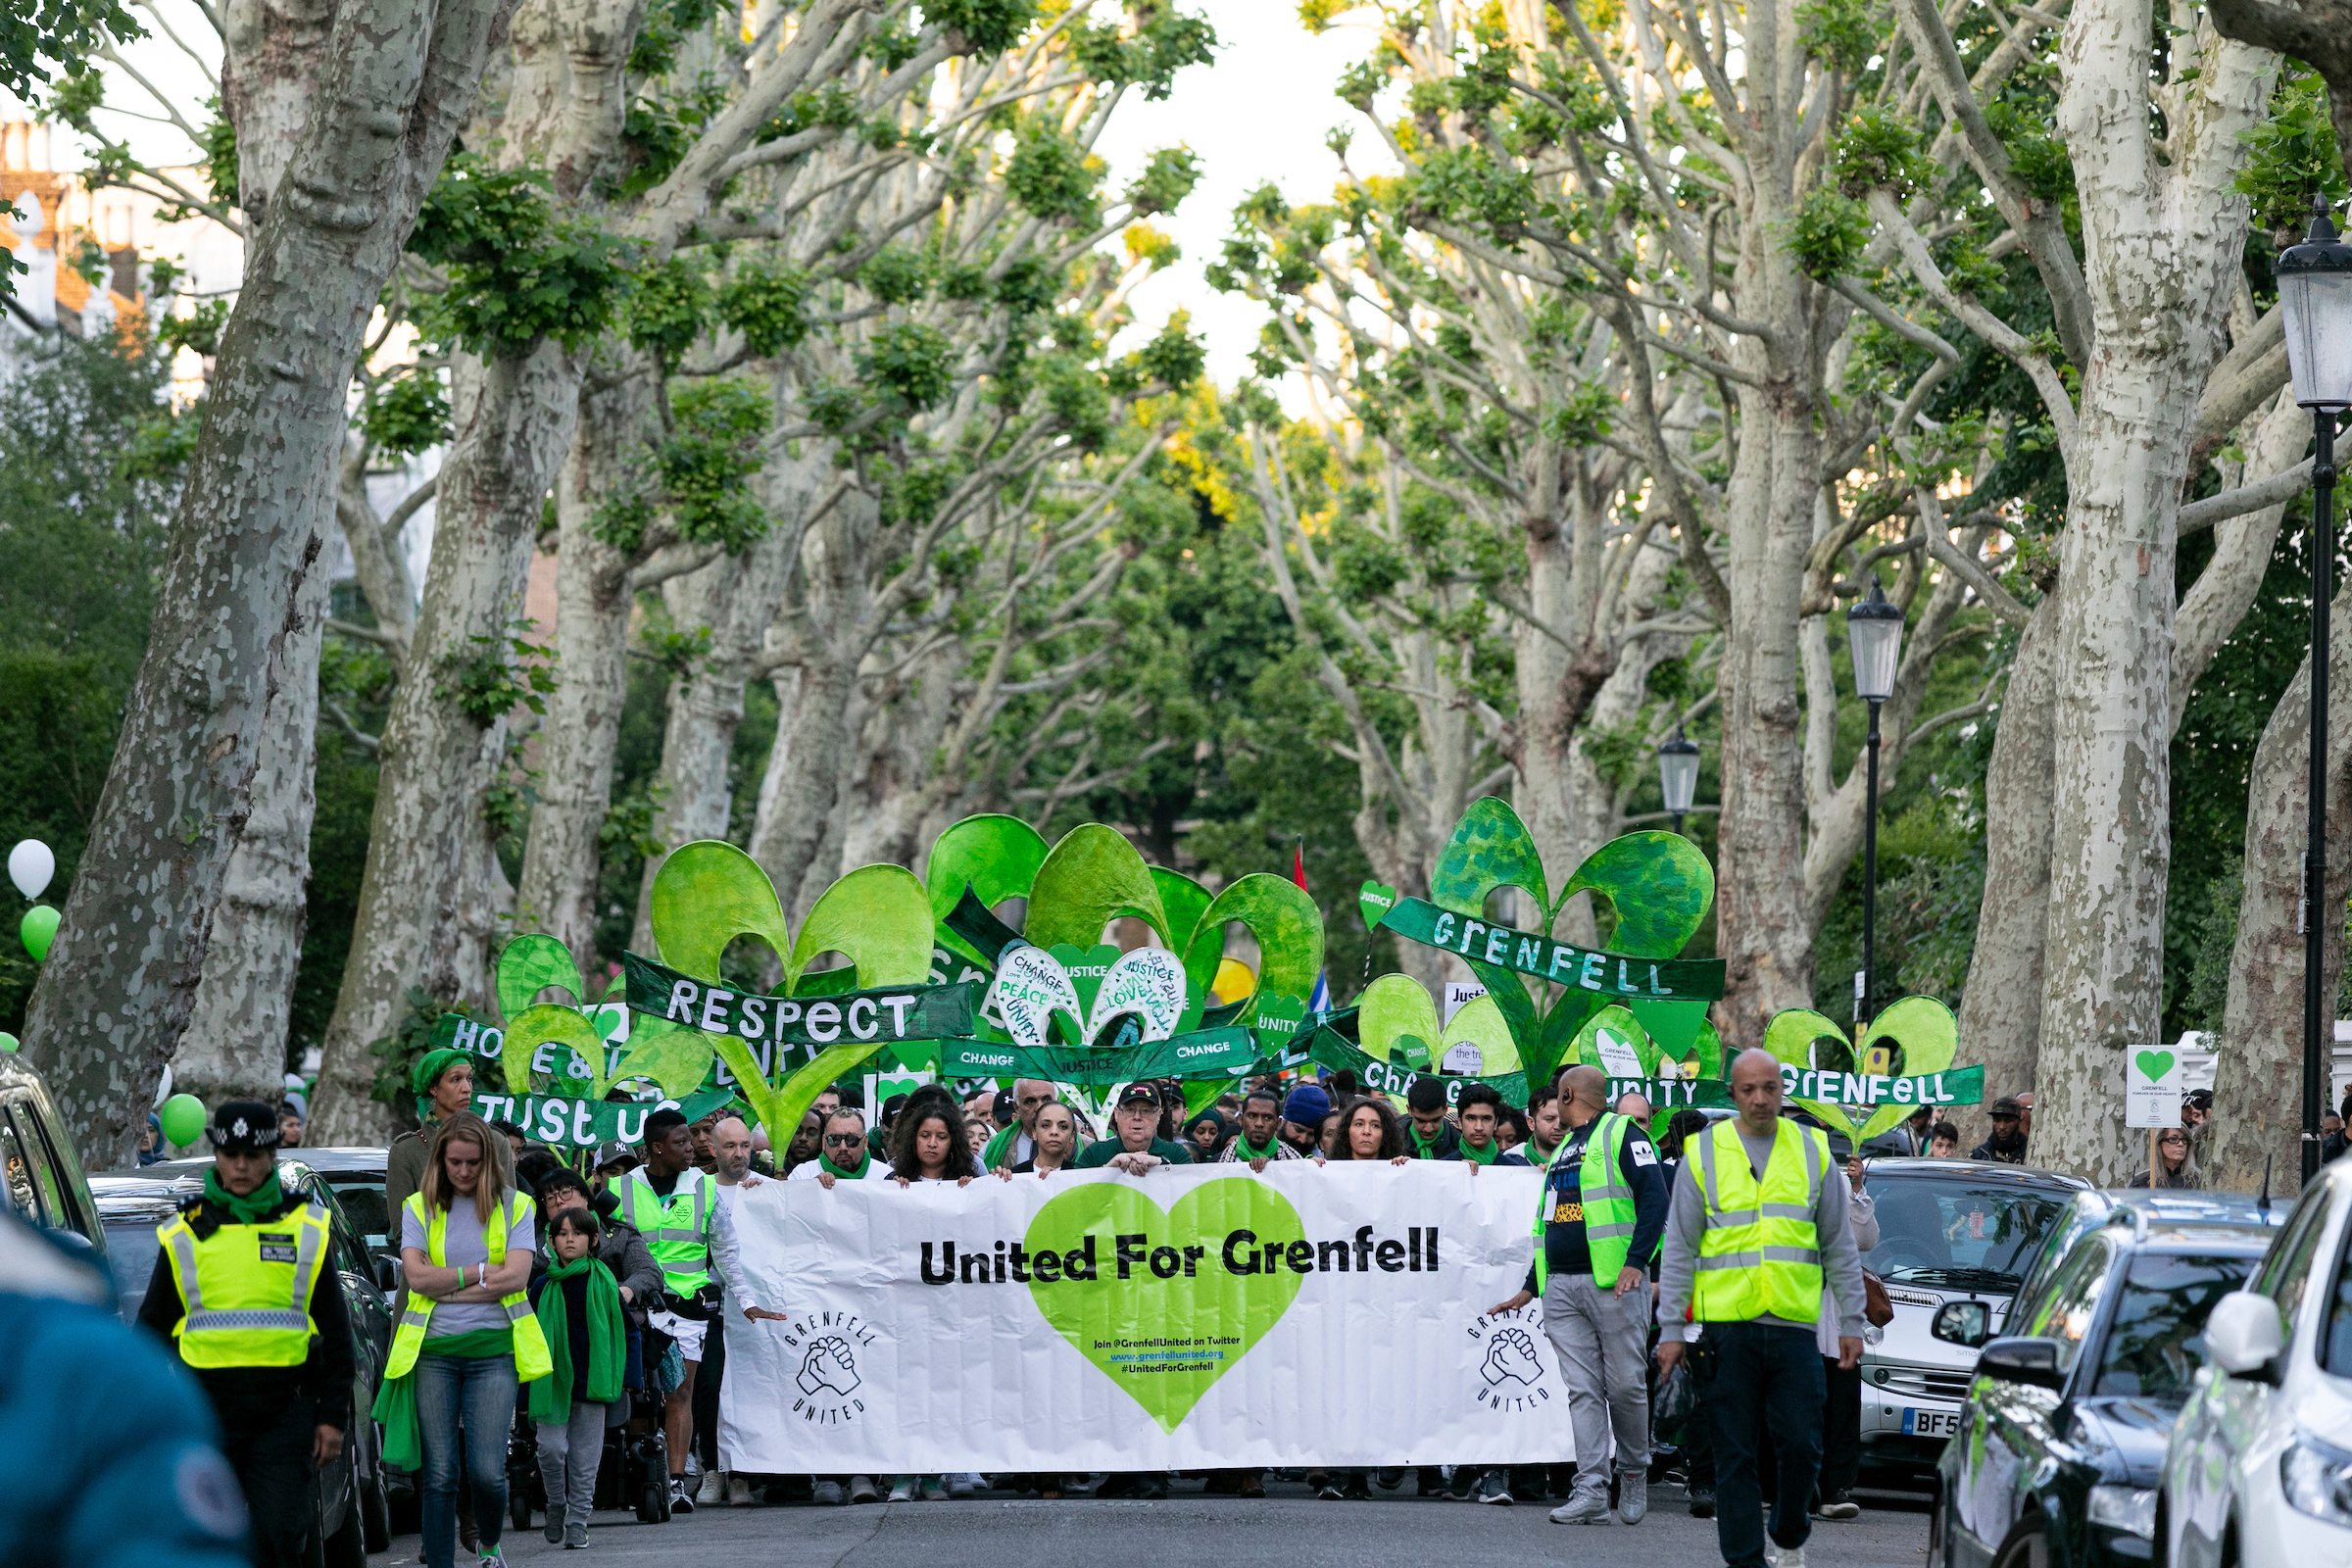 Photograph of a group of people walking peacefully, holding green hearts and banners, on a road flanked by large tall trees